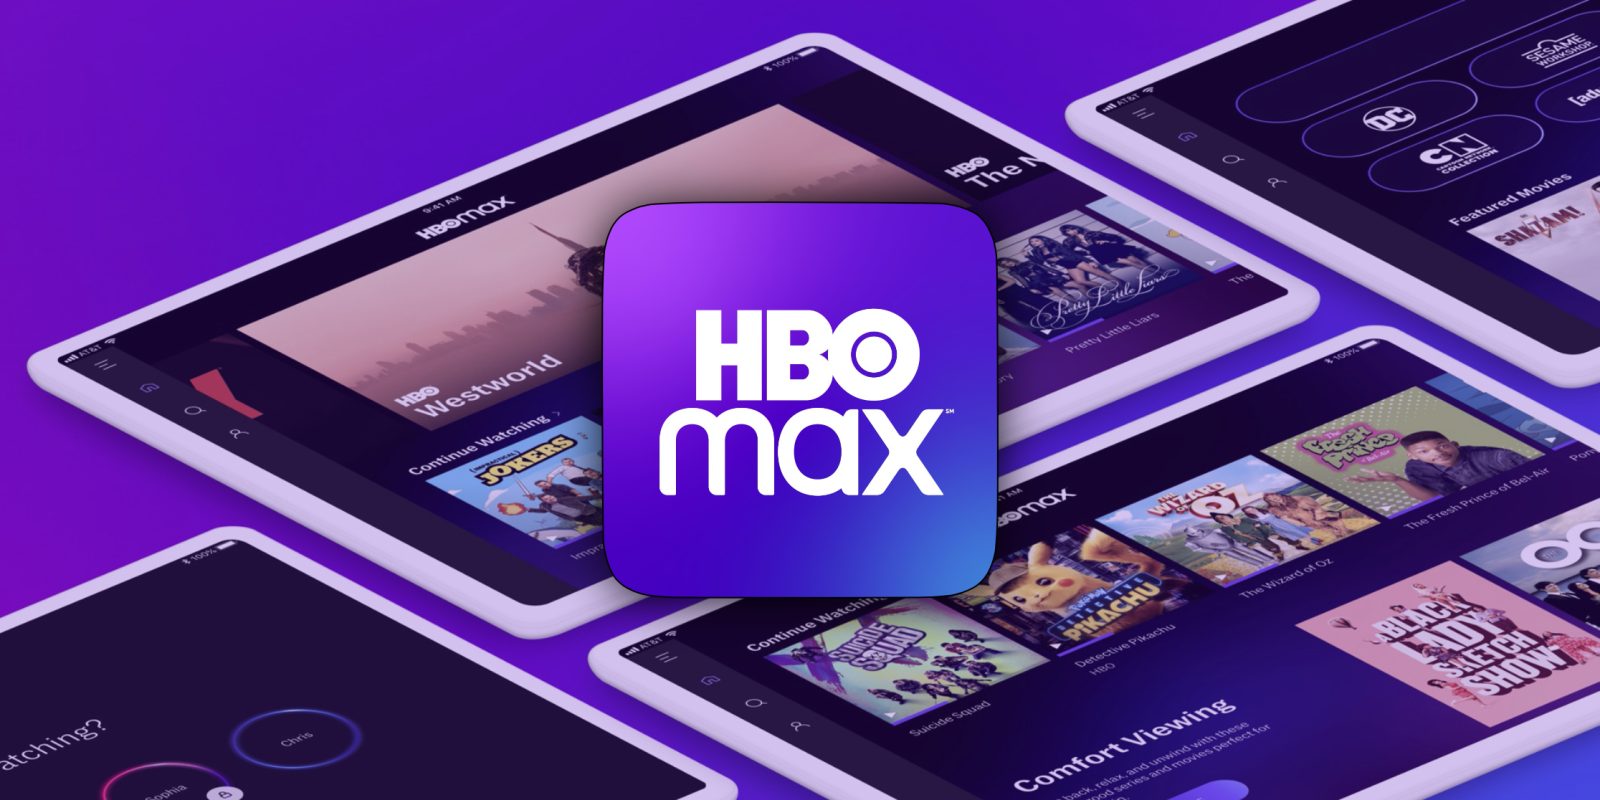 torsdag metodologi unlock HBO Max now available for iPhone, iPad and Apple TV - 9to5Mac